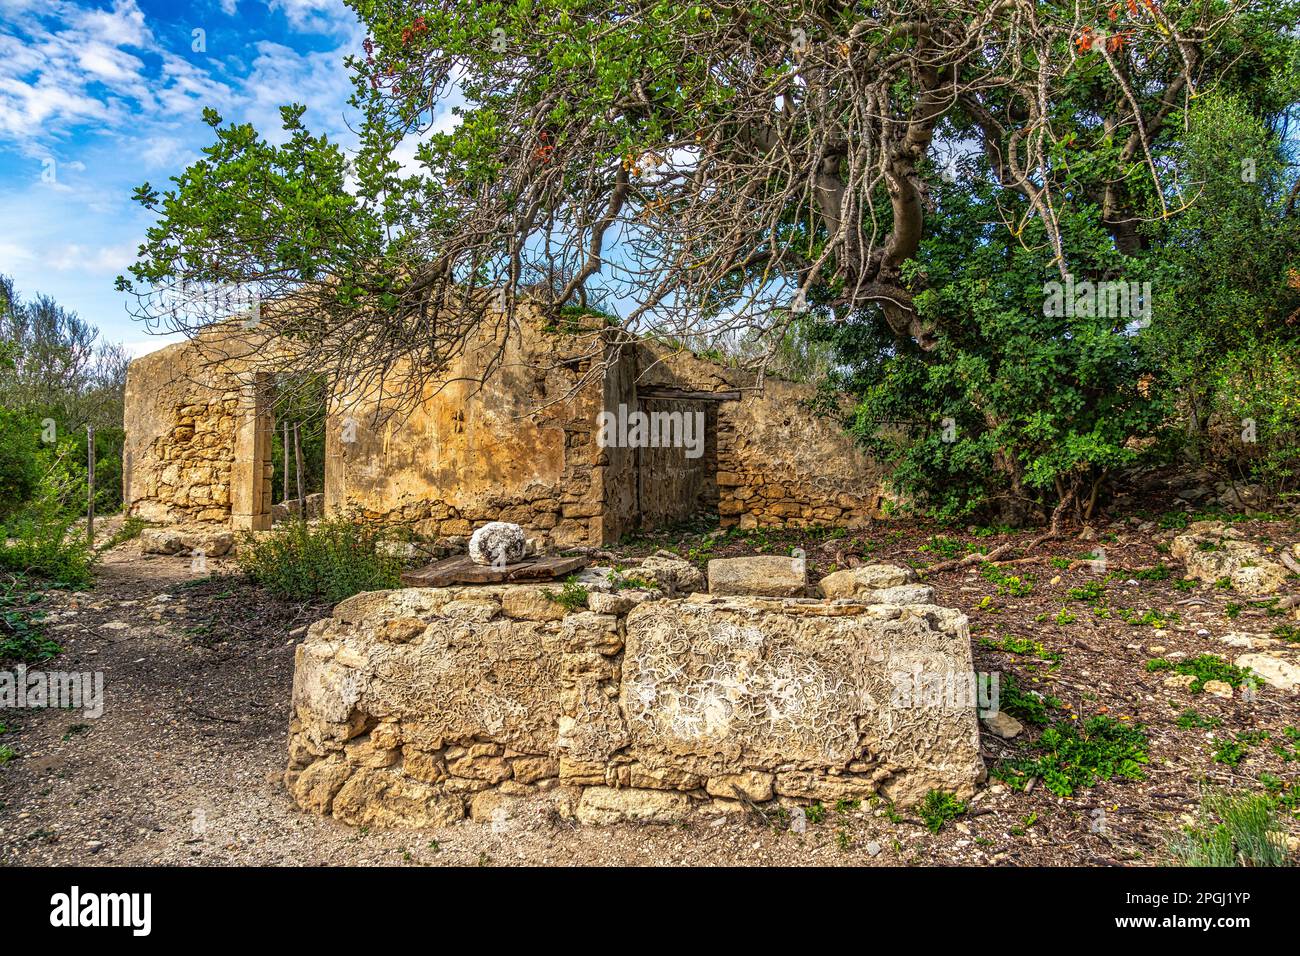 Remains of ancient settlements with ruined buildings and wells for drawing water. Vendicari nature reserve, Noto, Syracuse province, Sicily, Italy Stock Photo